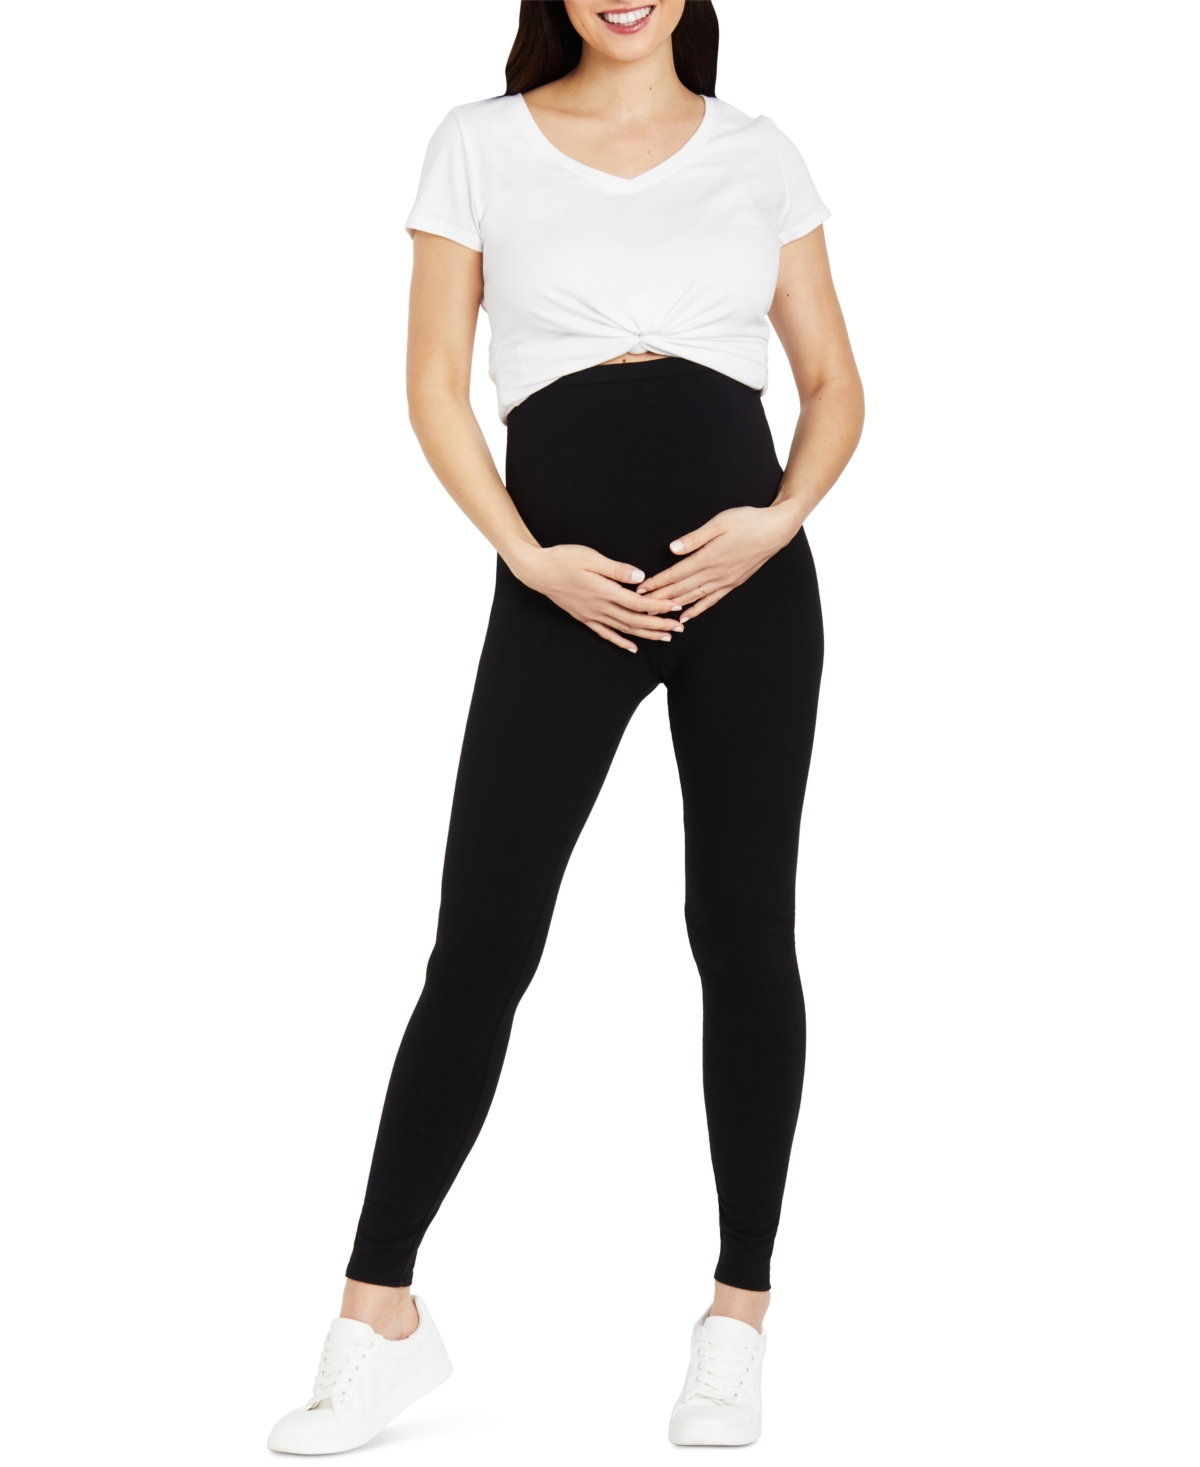 Essential Stretch Over the Bump Maternity Leggings - Navy